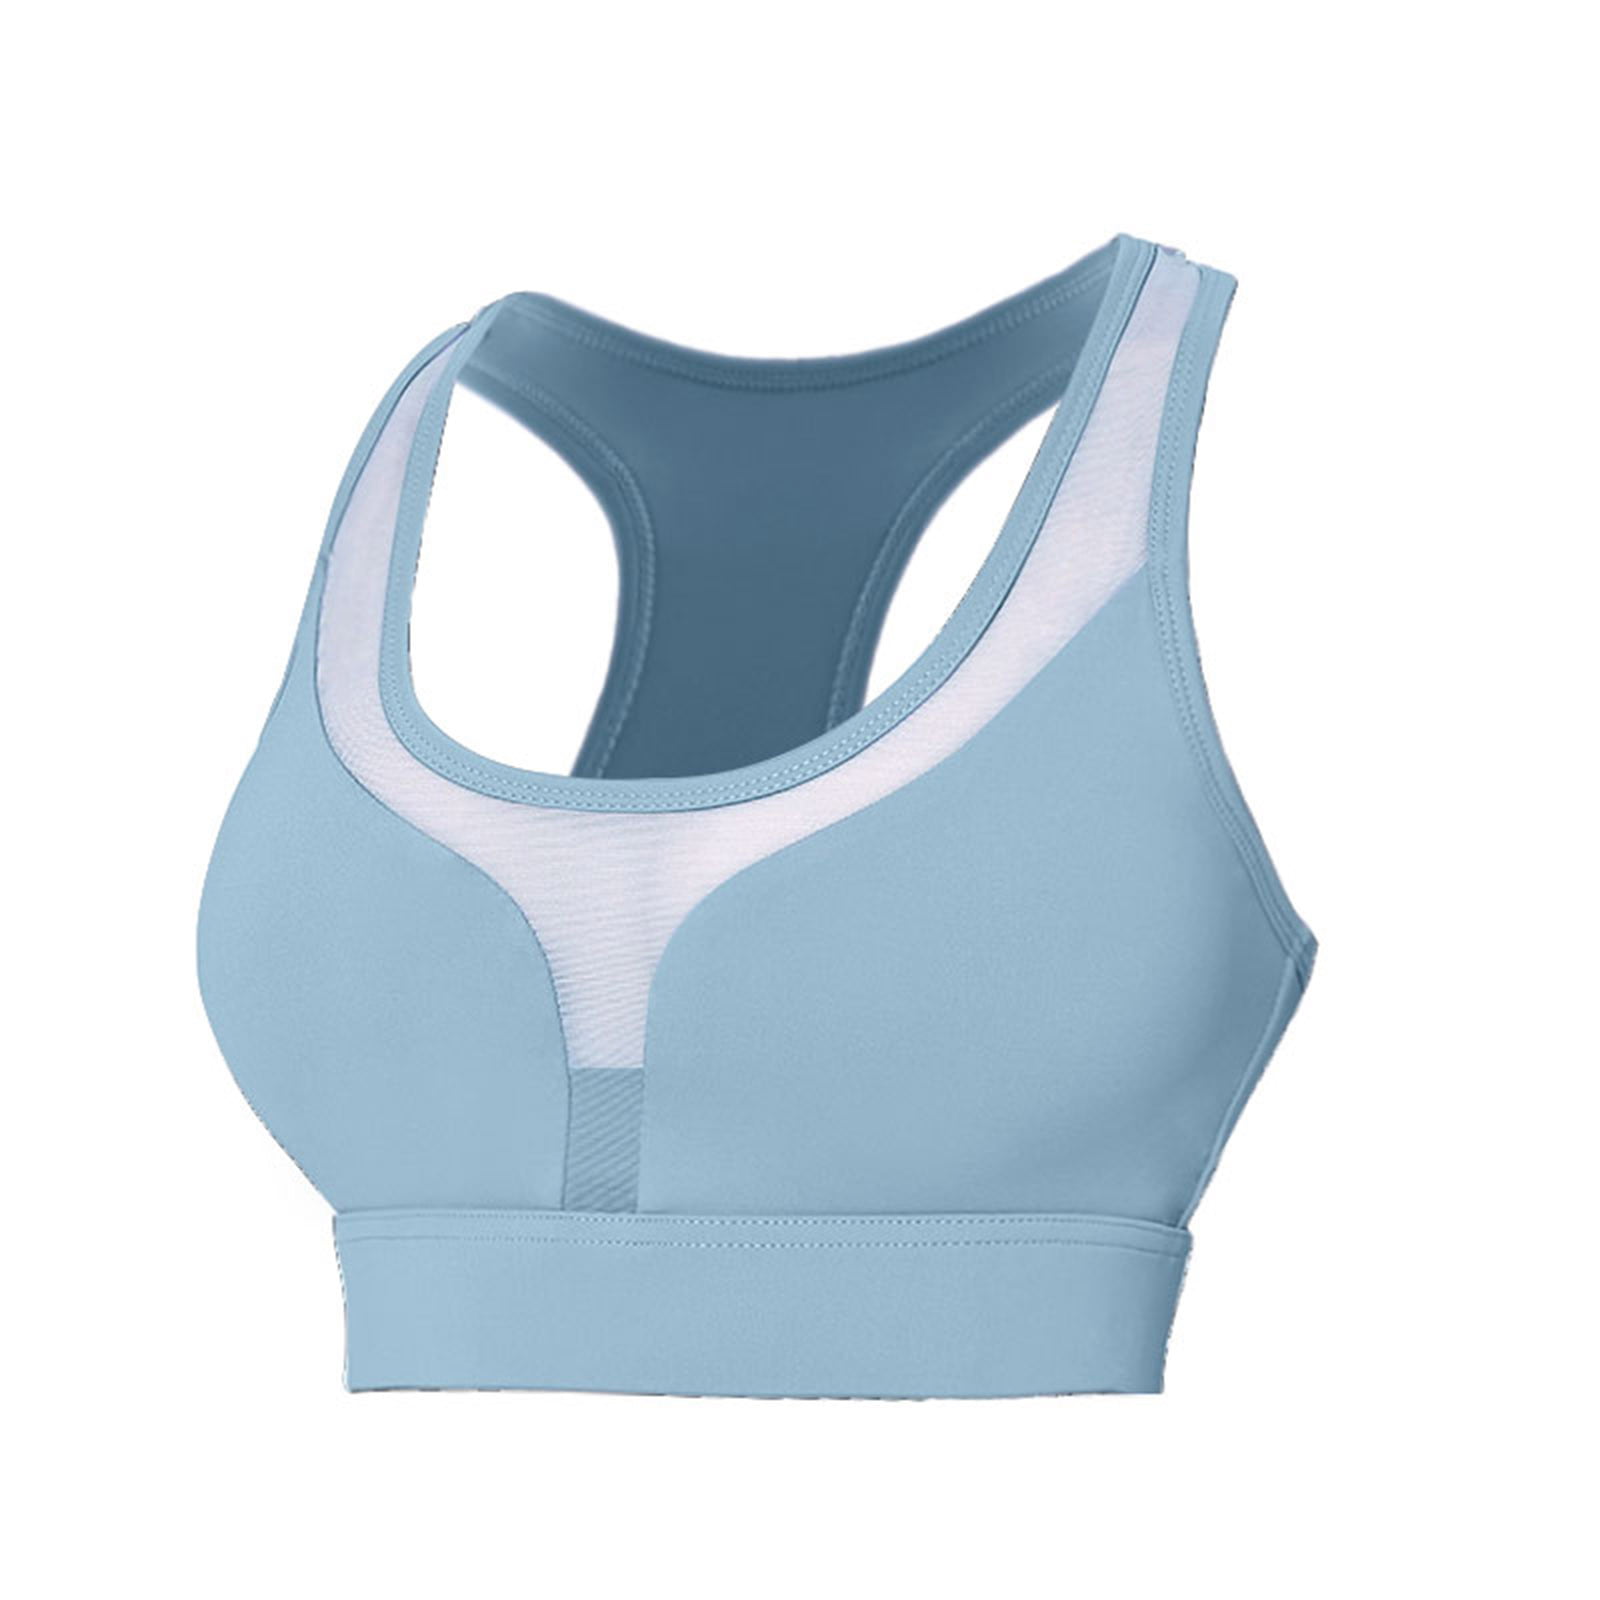 Sports Bras for Women Deals!AIEOTT Sexy Plus Size Front Closure Wireless Bra，Fitness  Running Shockproof Yoga Tank Top Front Zipper No Steel Ring Bra,Gifts for  Women,Yoga Bra,Summer Savings Clearance 